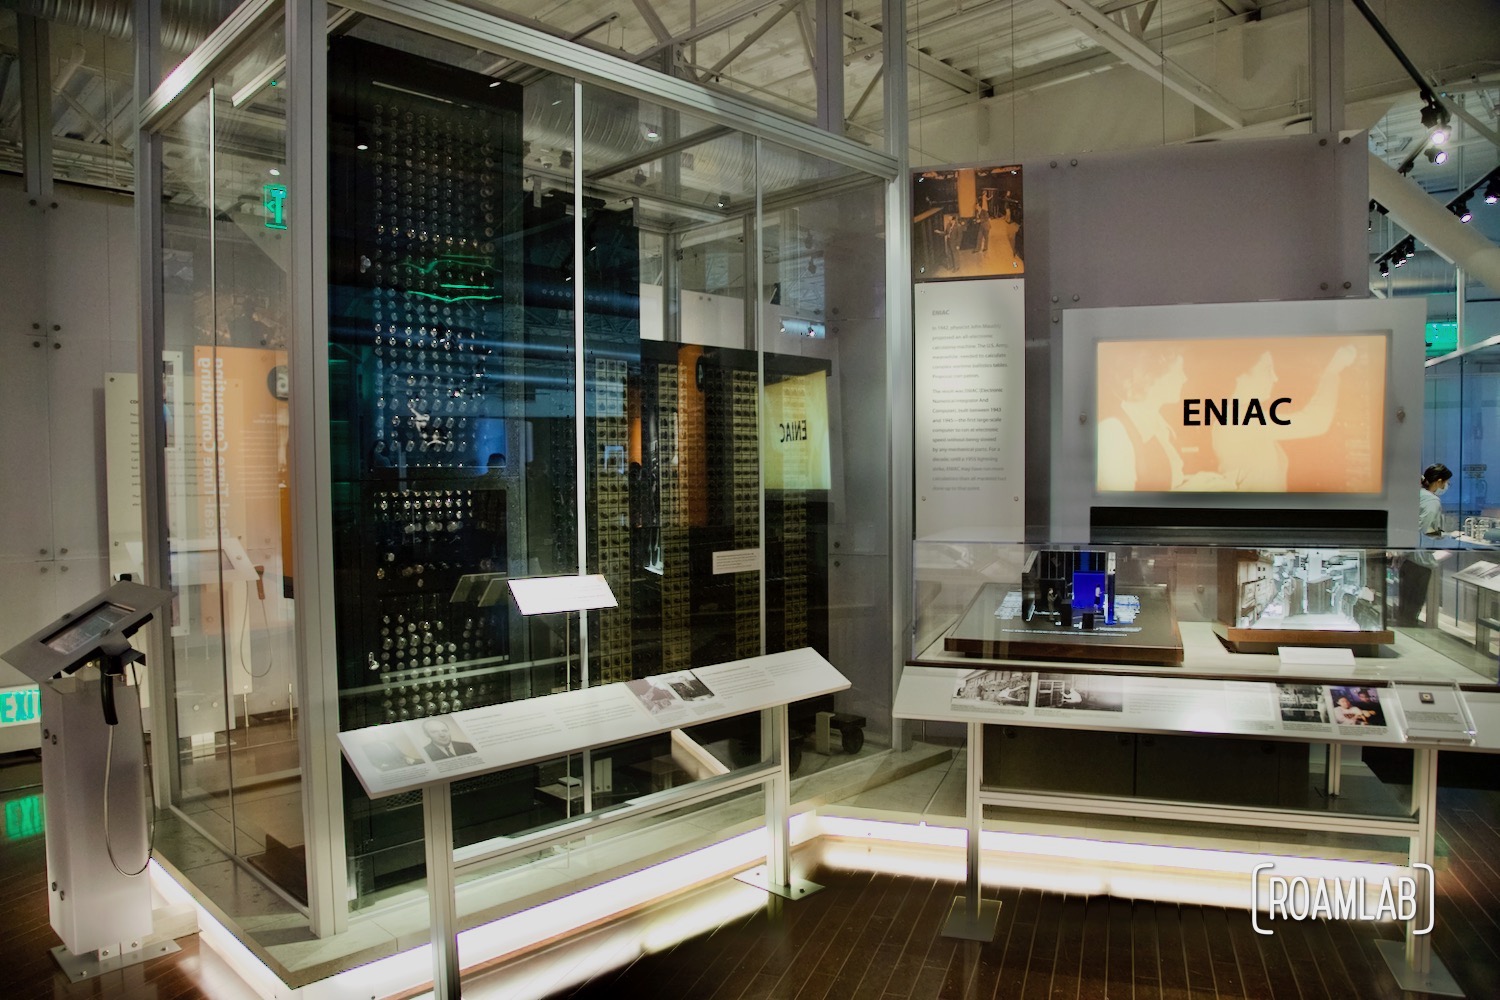 Pieces and scale models of the ENIAC on display.